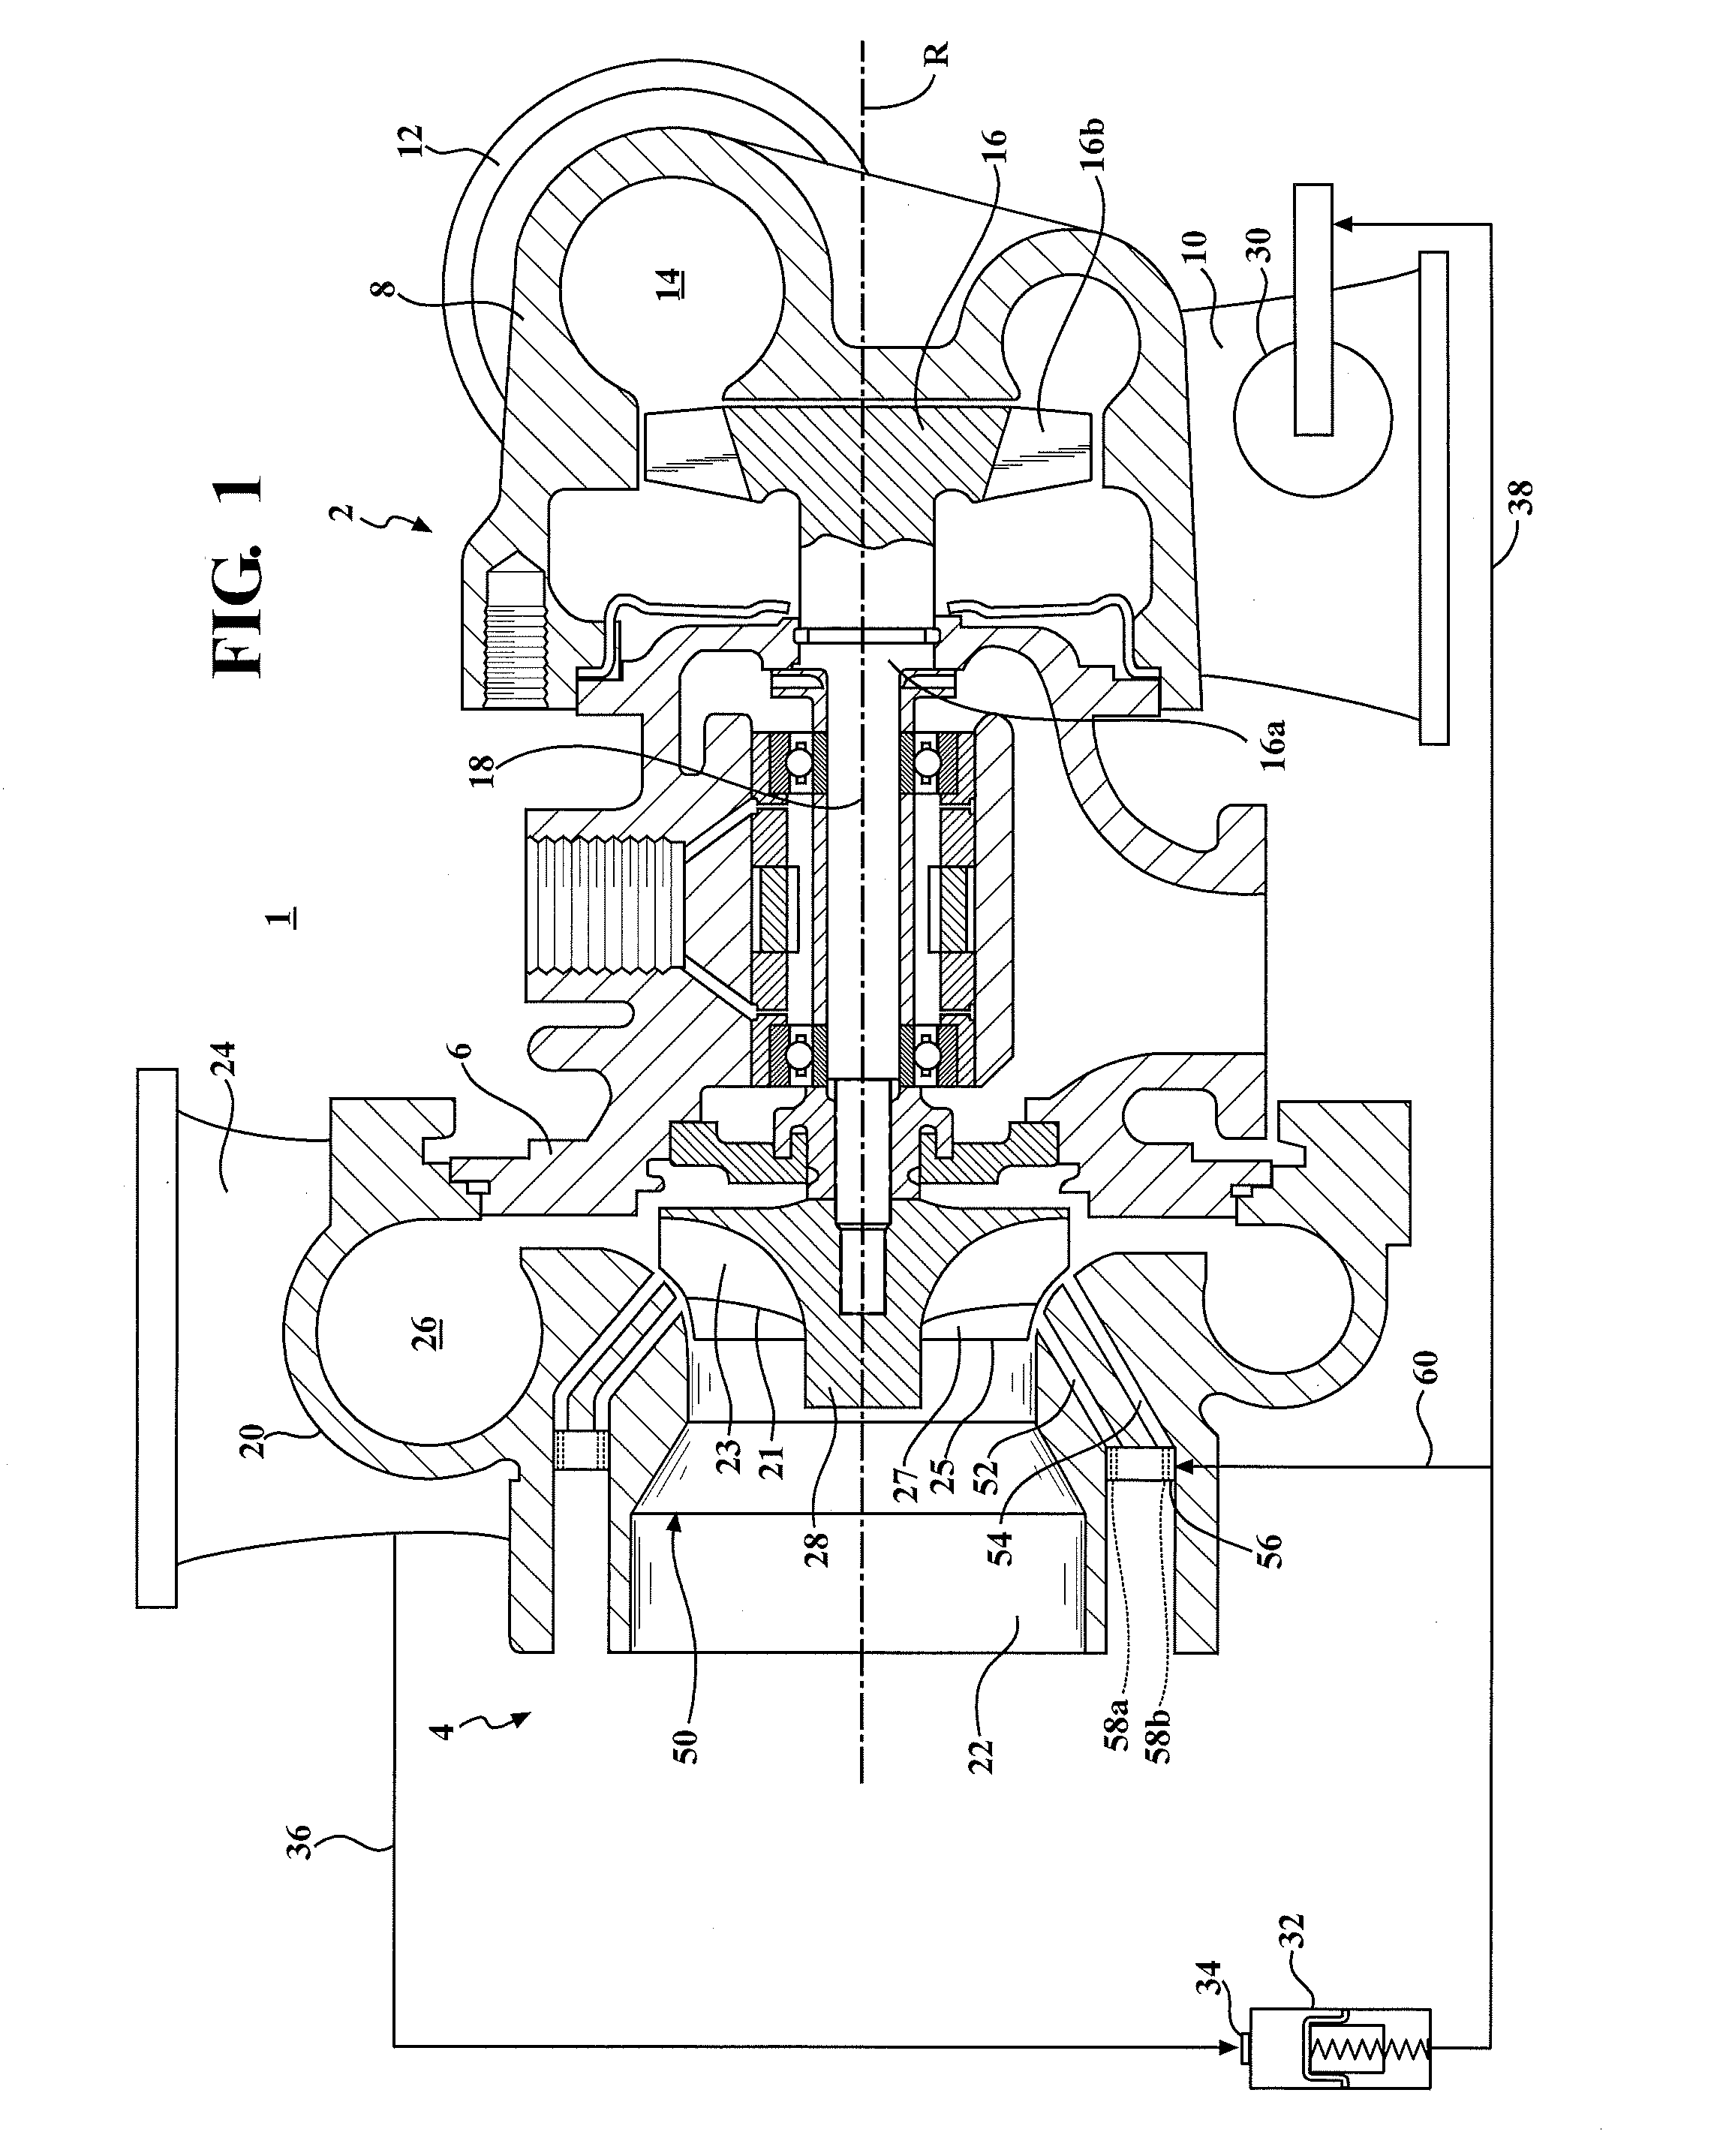 Turbocharger combining axial flow turbine with a compressor stage utilizing active casing treatment